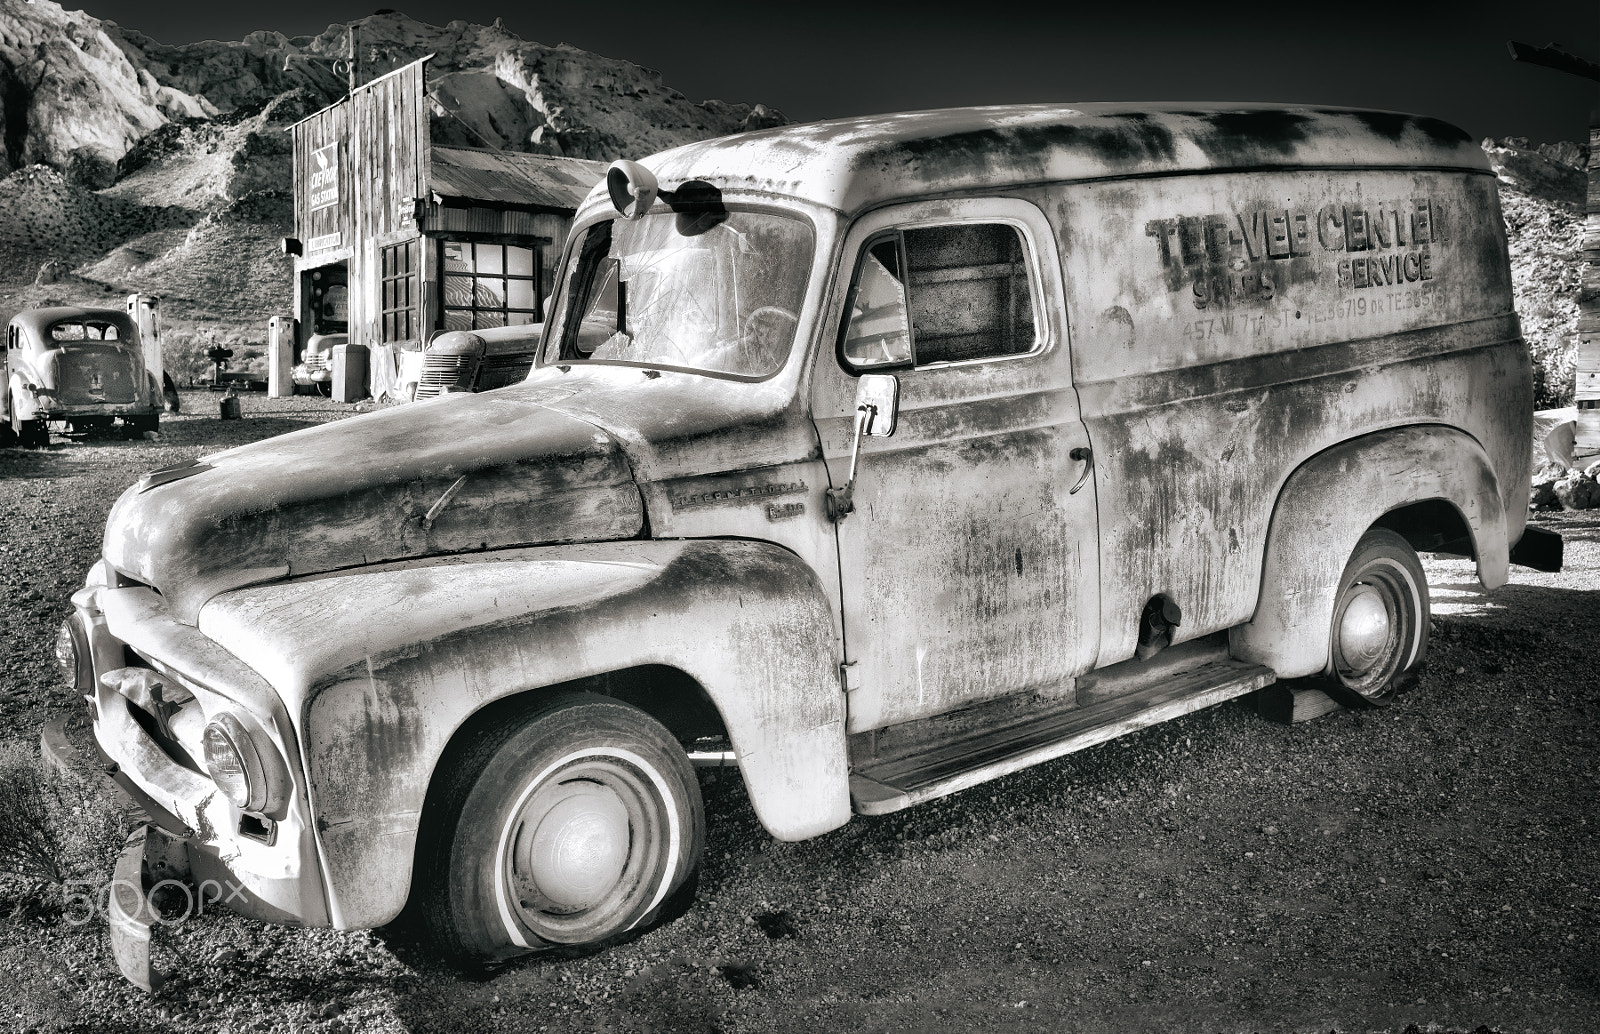 smc PENTAX-FA 645 45-85mm F4.5 sample photo. "tee vee center service van, nelson ghost town, nv photography